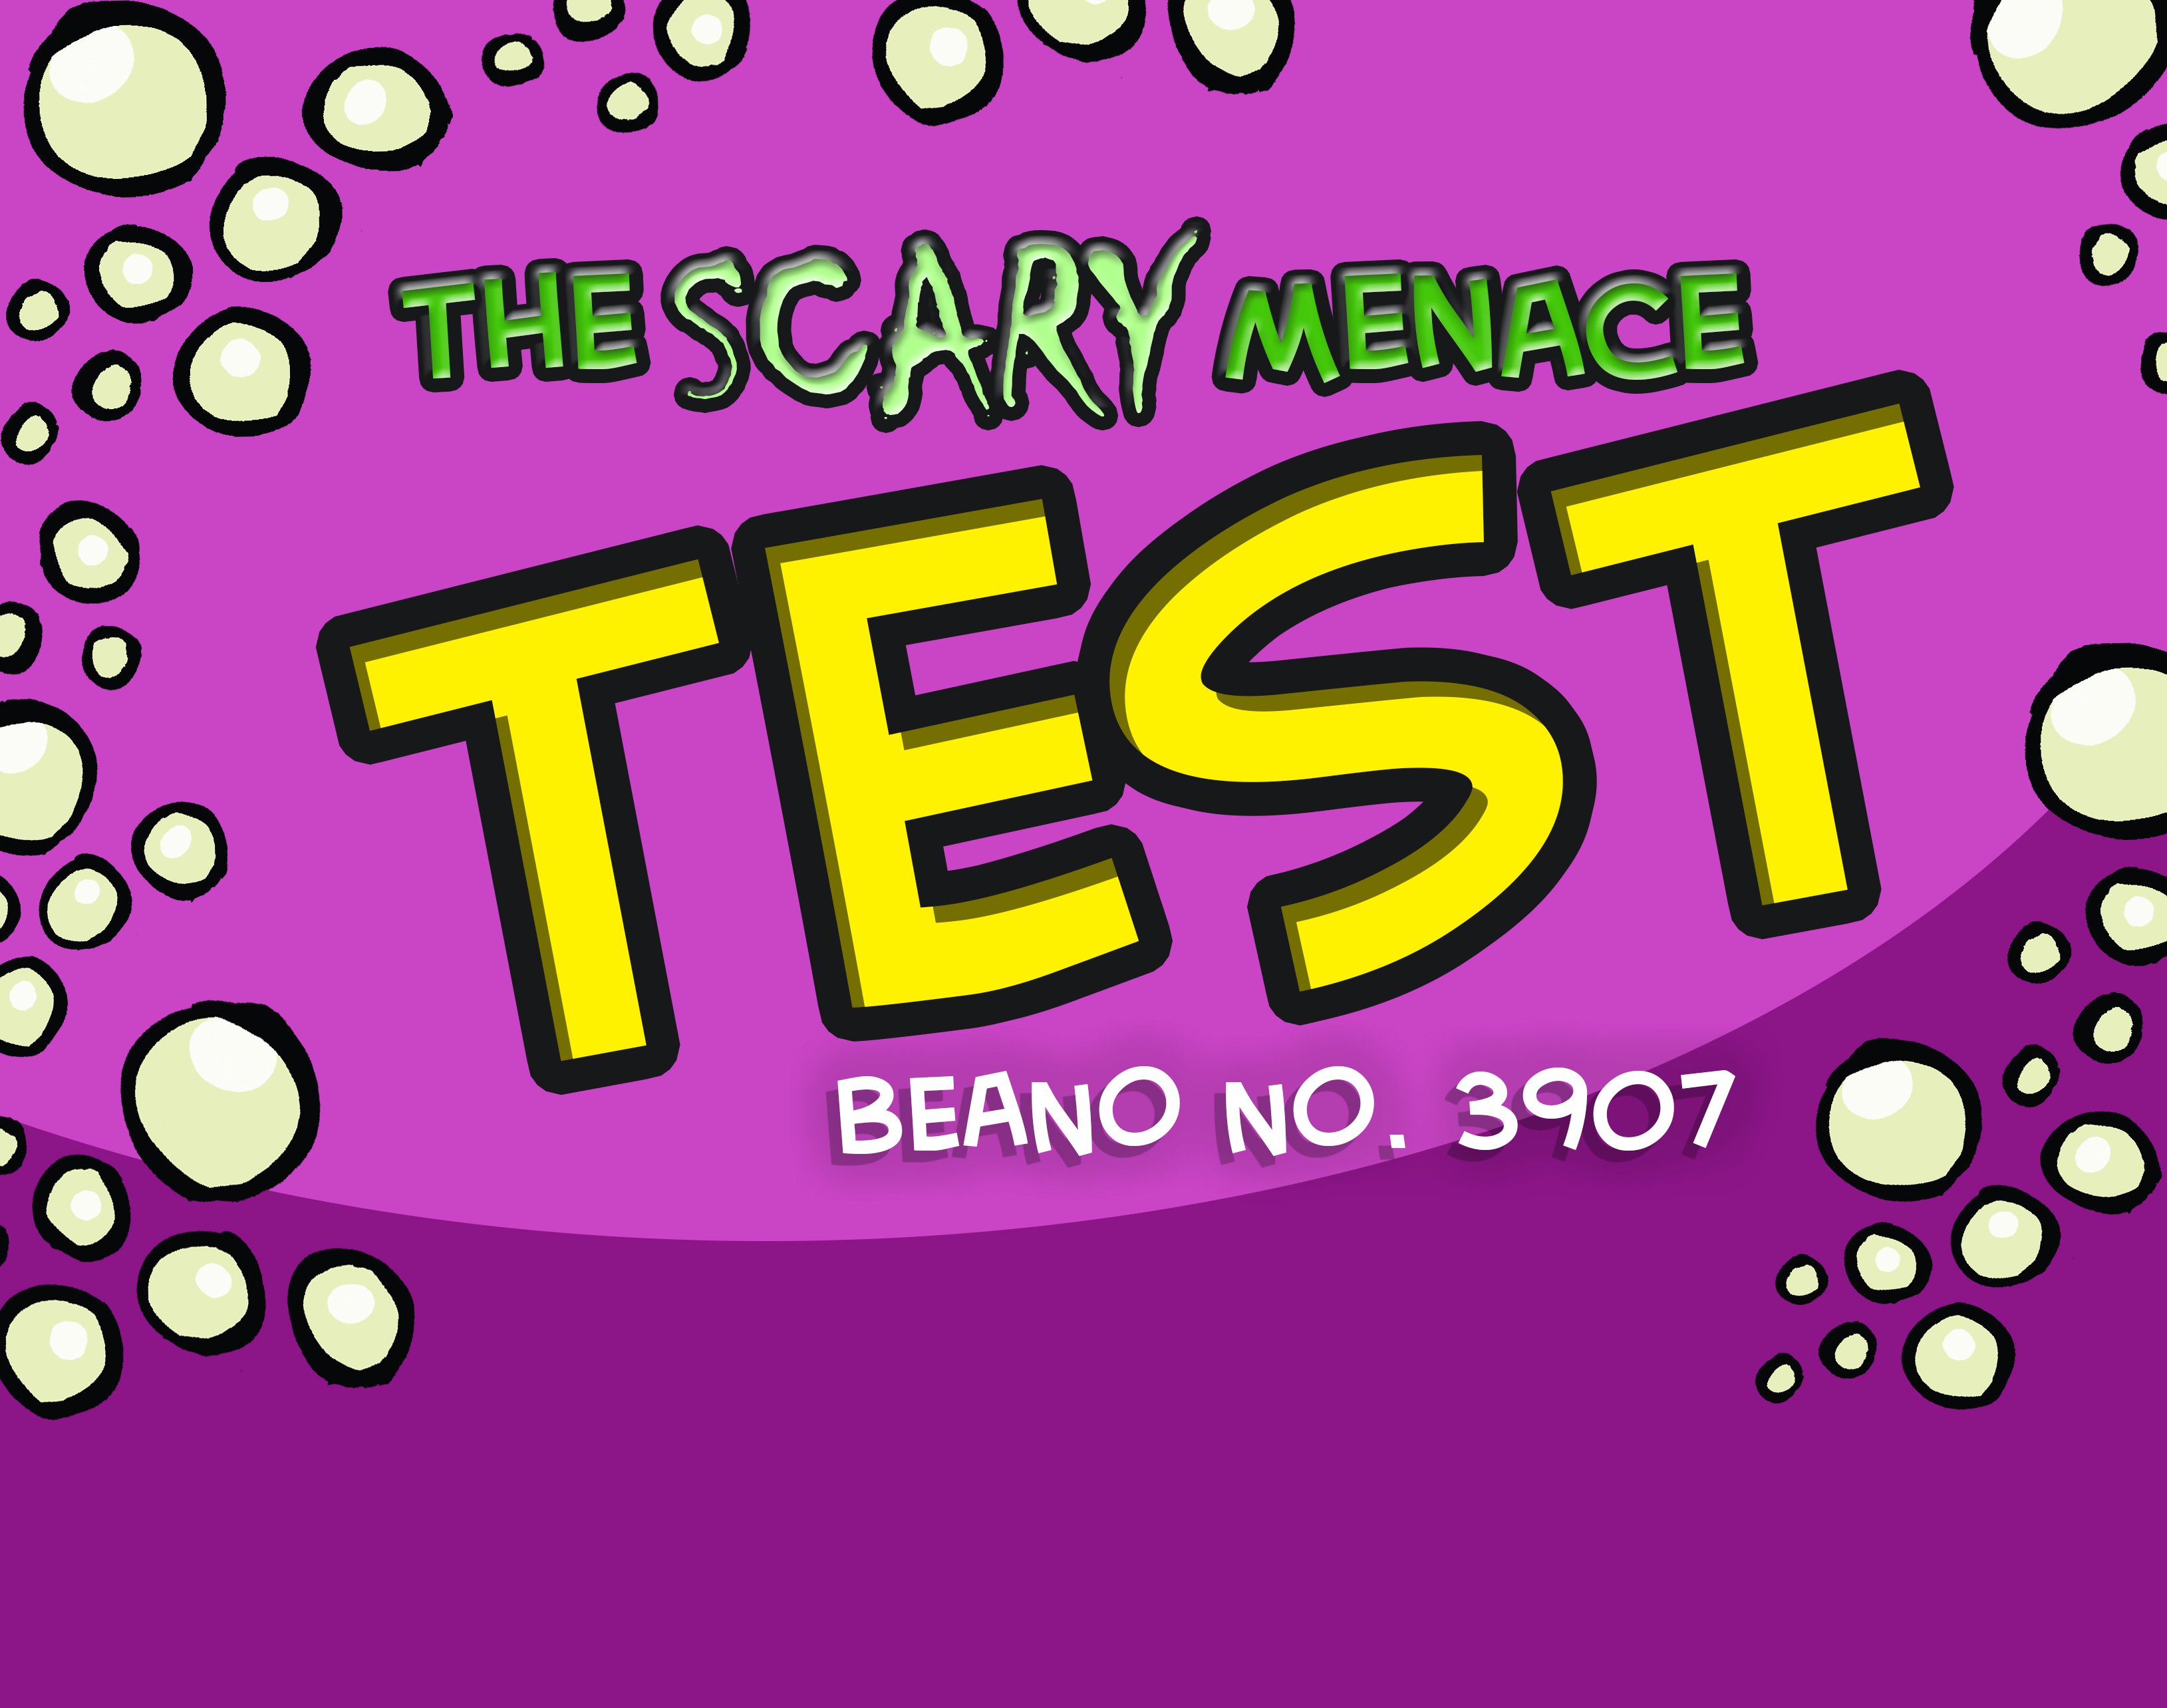 Can you ace the scary menace test this week?